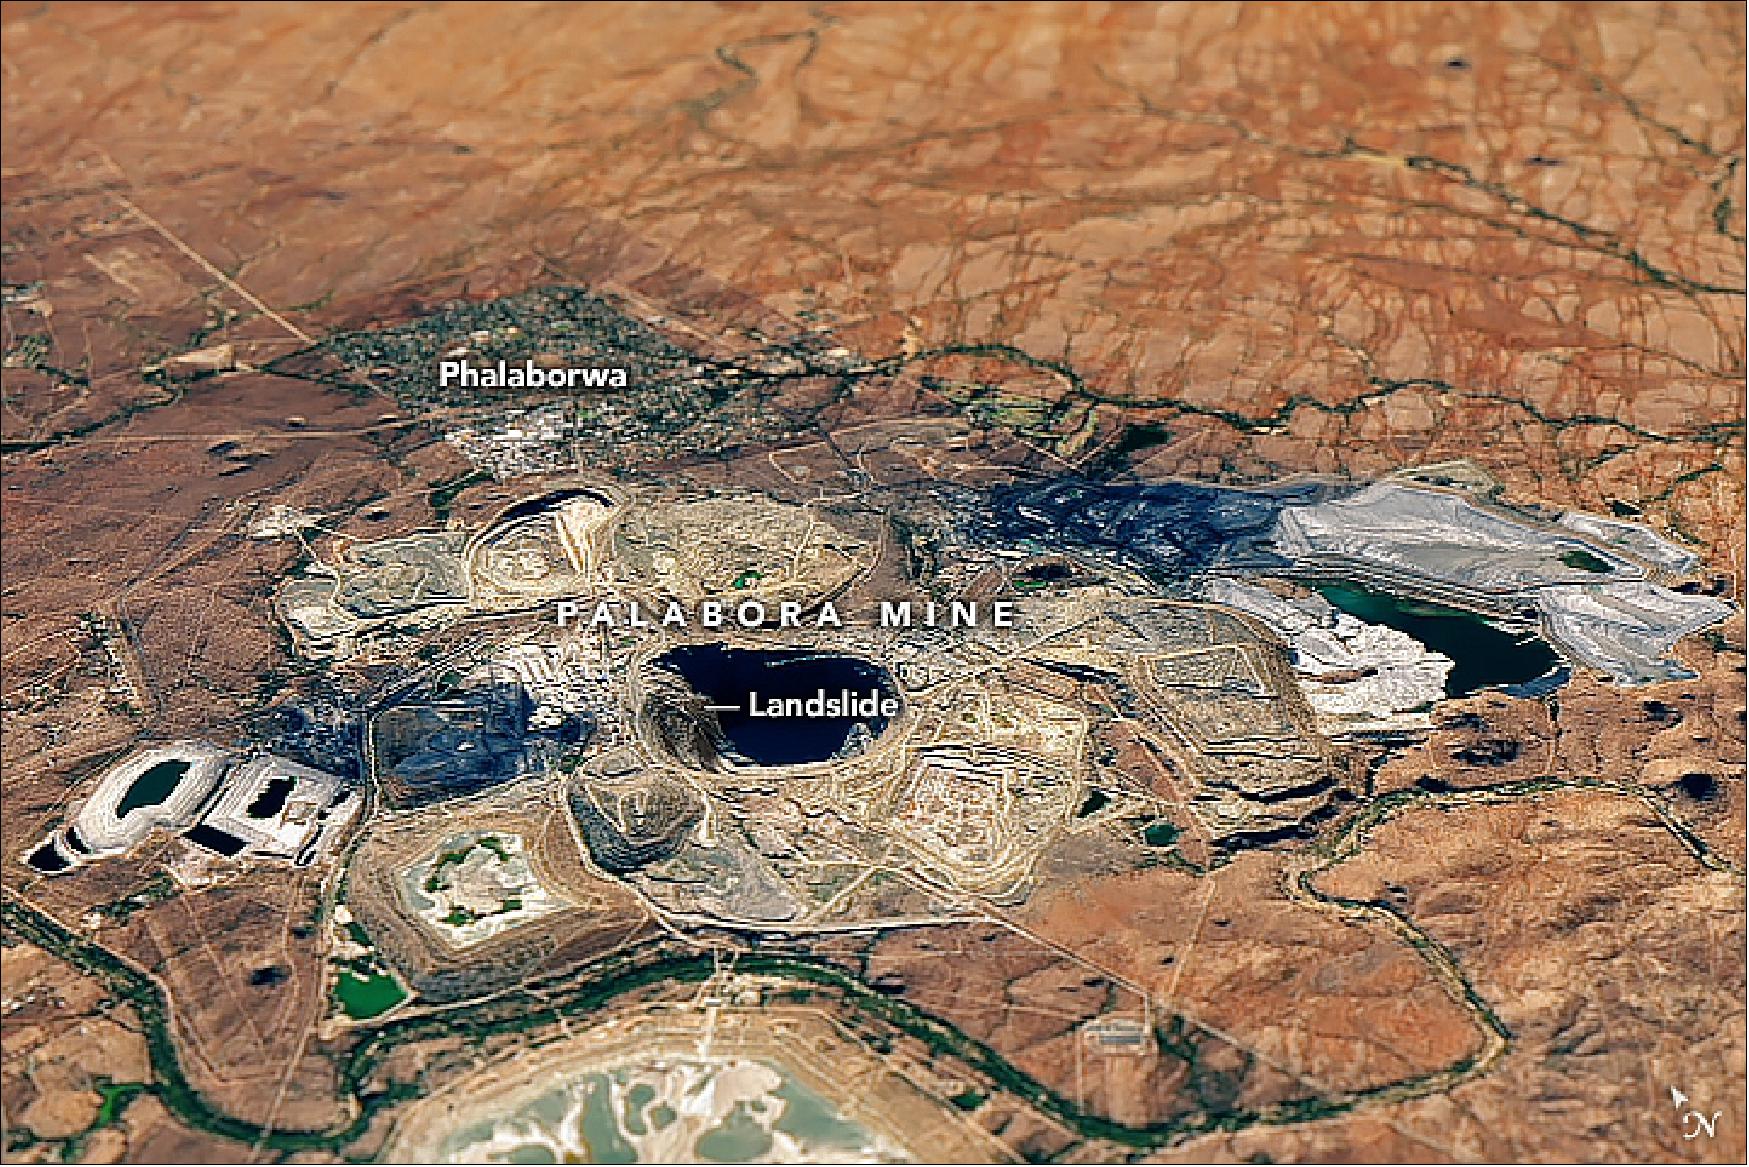 Figure 60: A more detailed image of the Palabora mine showing the landslide (image credit: NASA Earth Observatory image by Joshua Stevens and Allison Nussbaum, using Landsat data from the U.S. Geological Survey and topographic data from the Shuttle Radar Topography Mission (SRTM). Story by Kathryn Hansen)